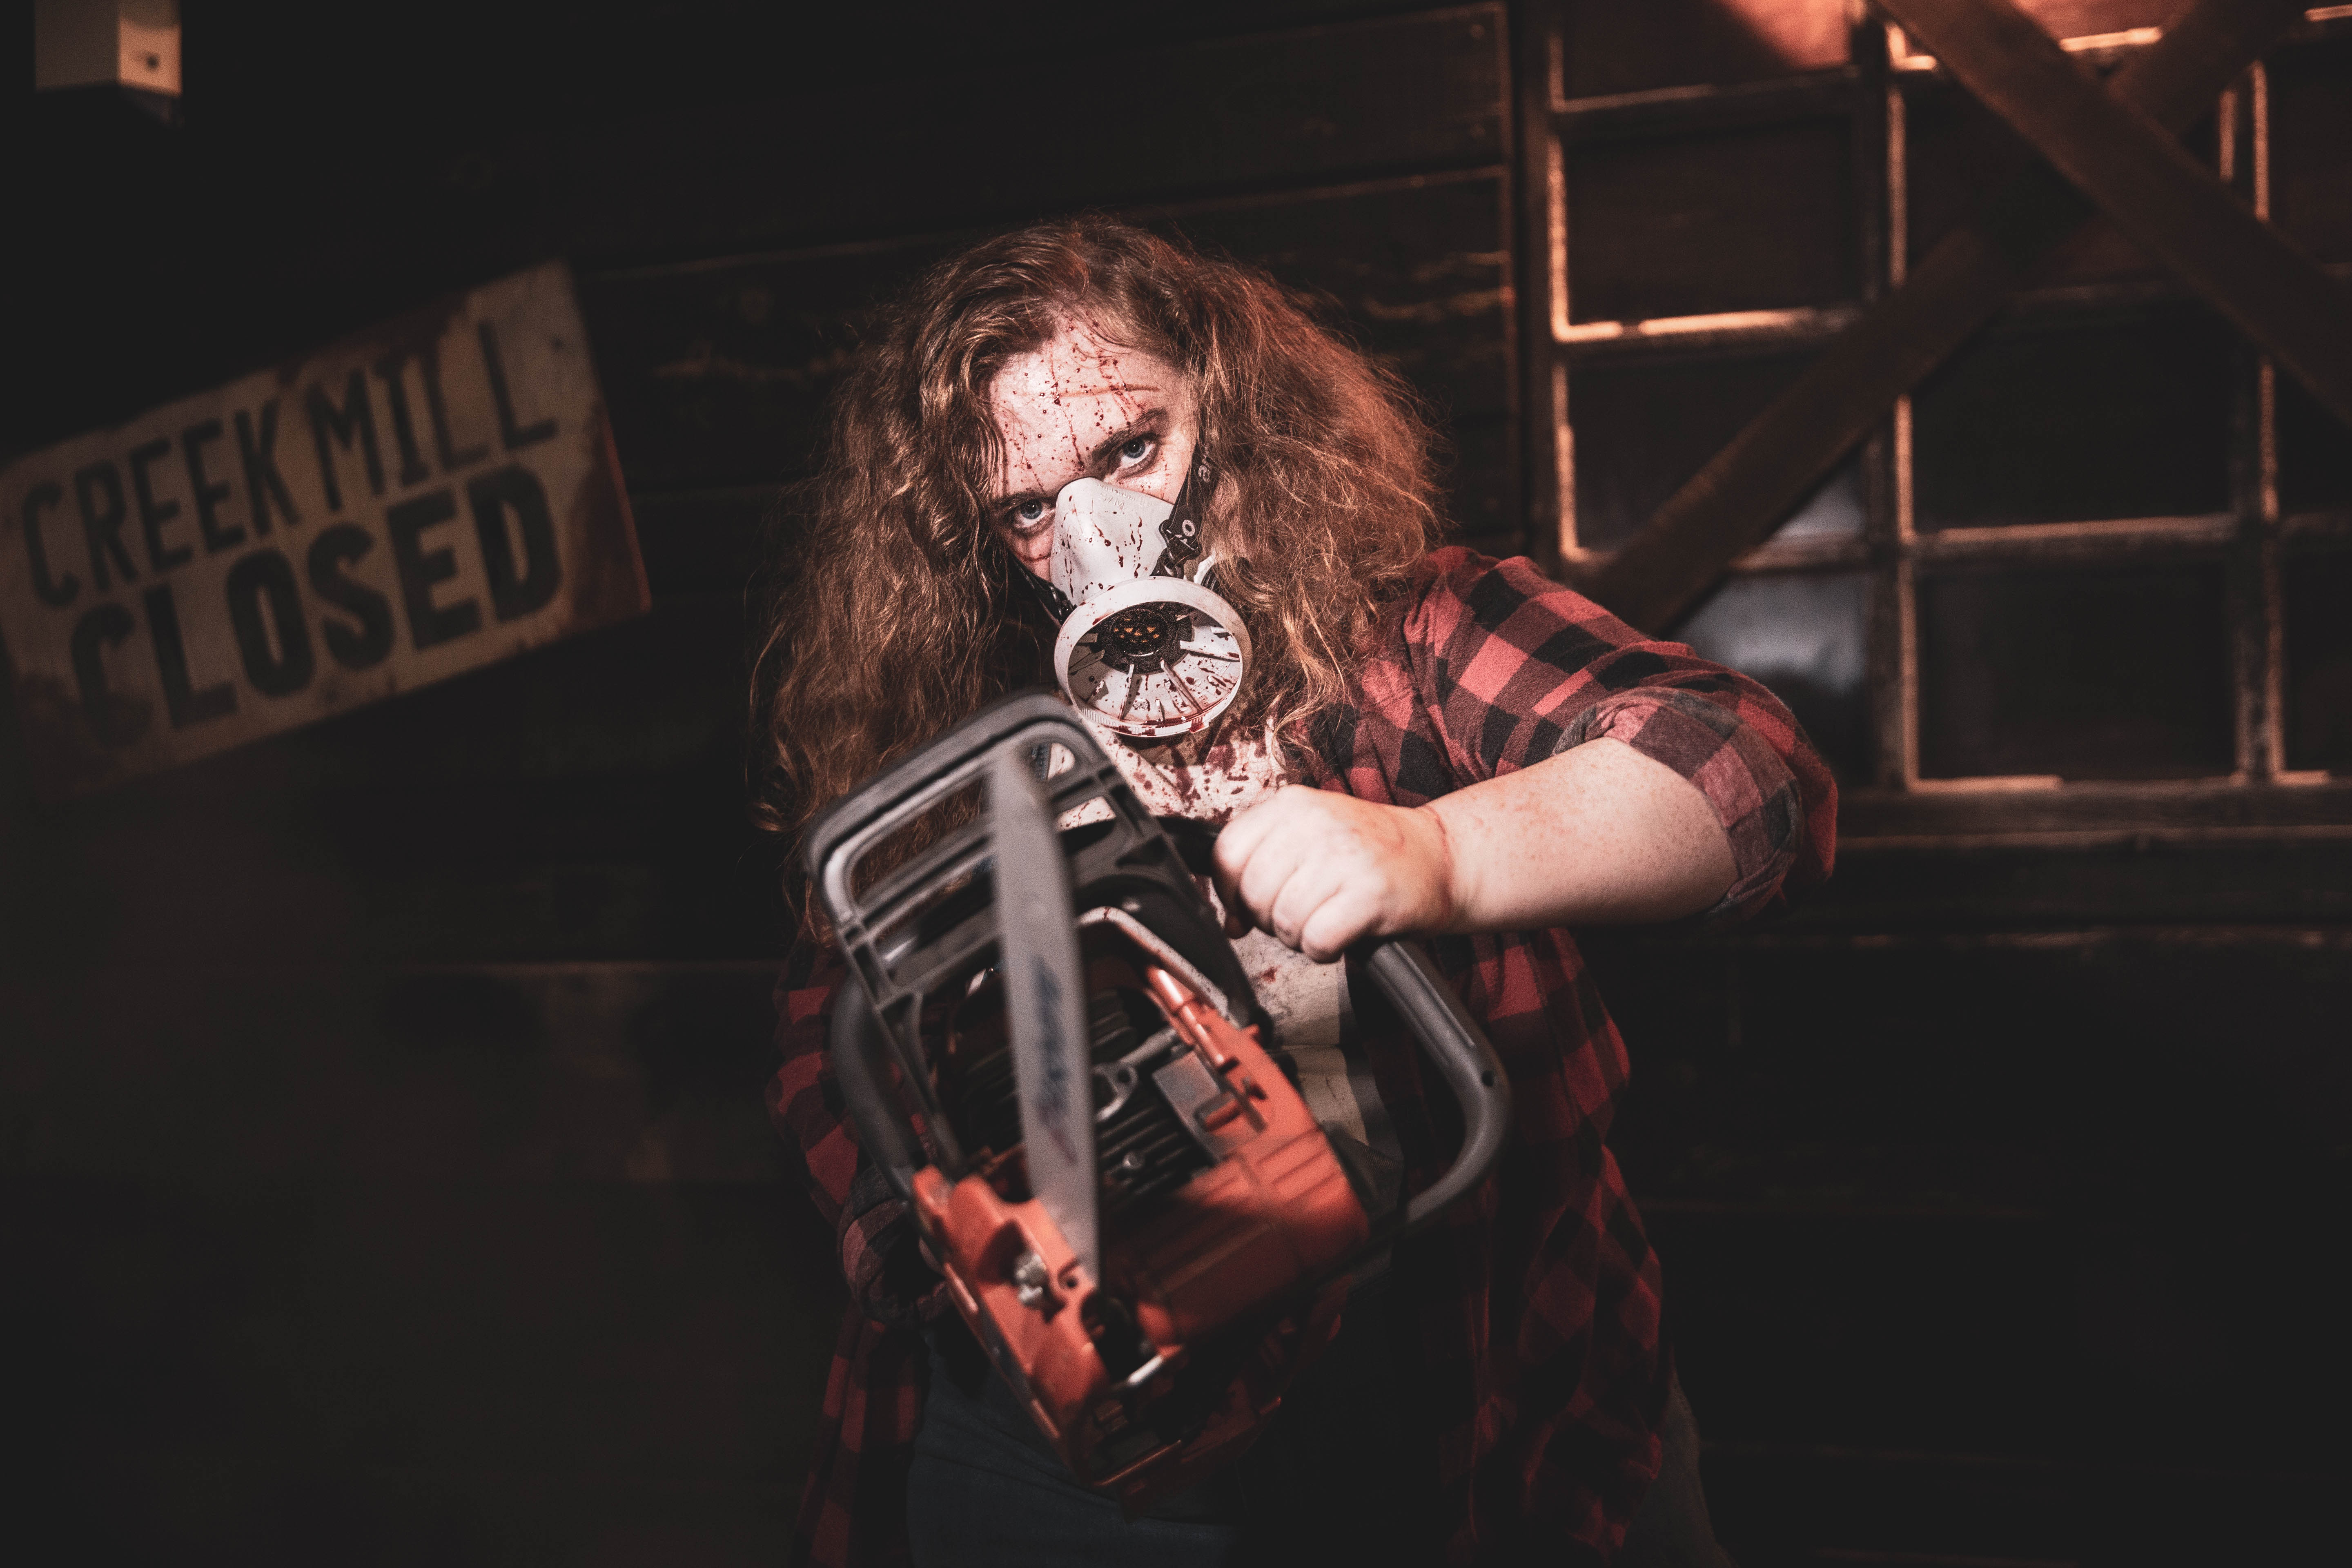 Creek Freaks Unchained at THORPE PARK Resort FRIGHT NIGHTS